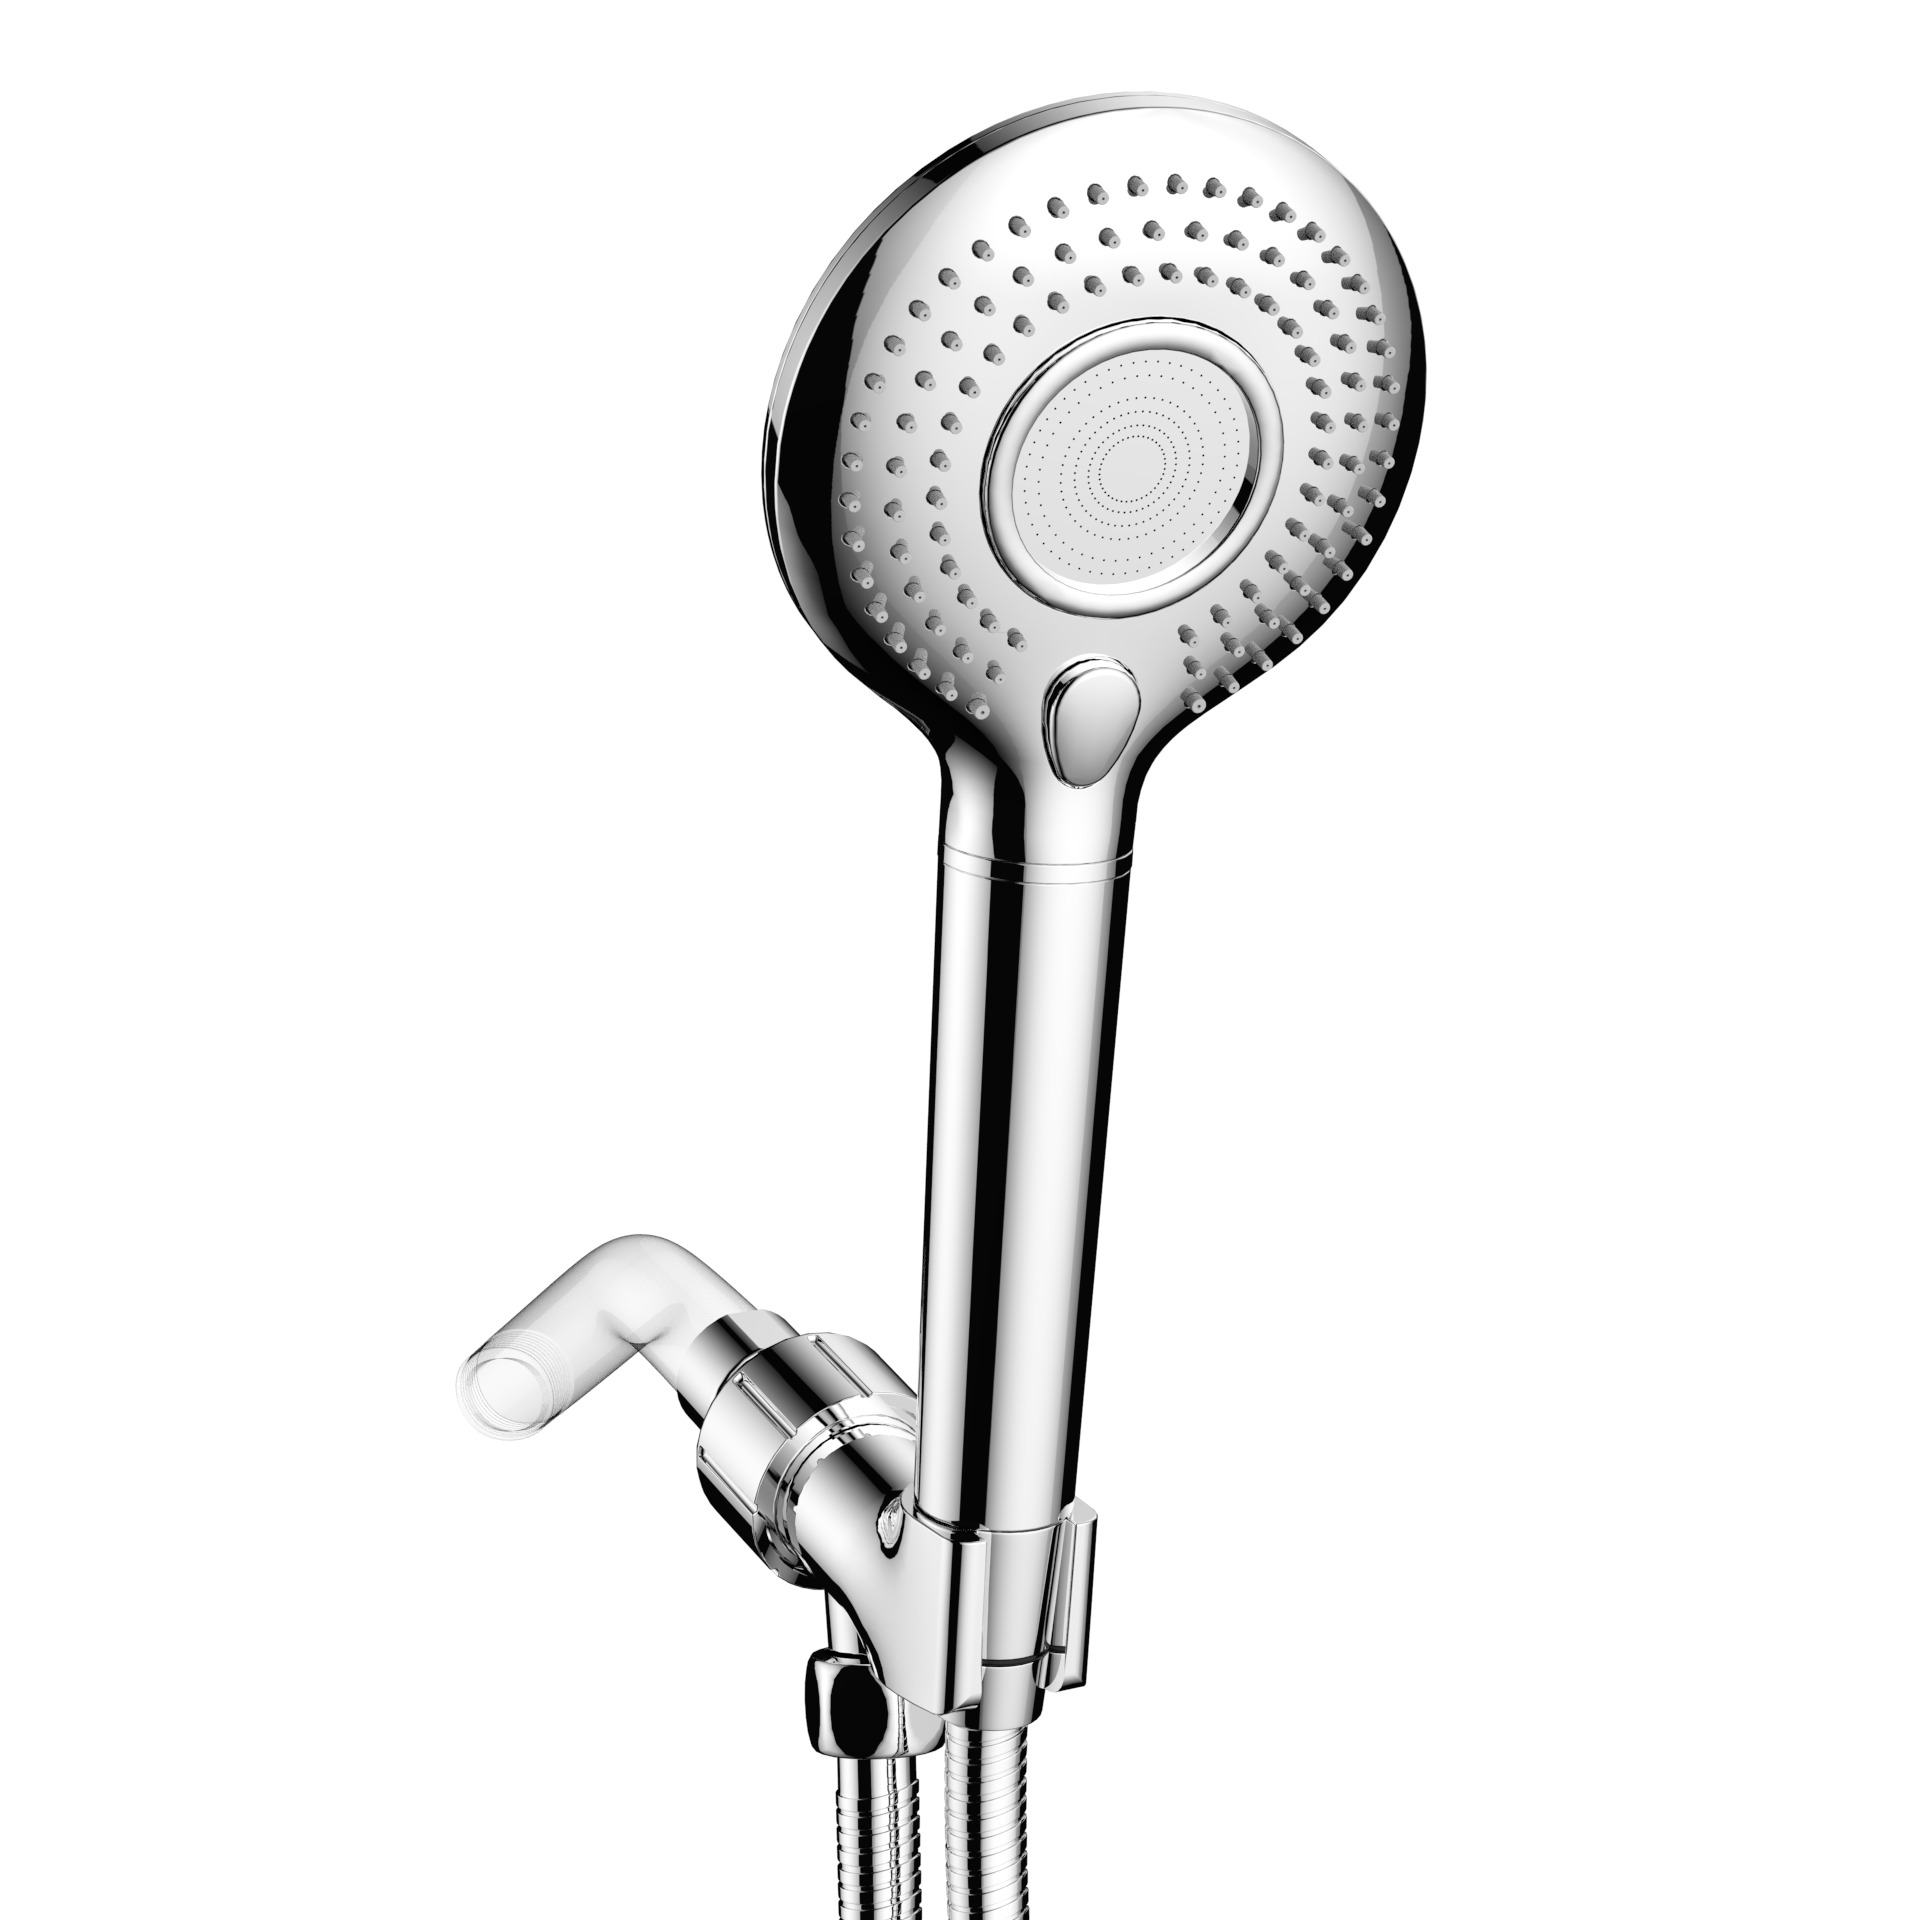 FEELSO Filtered Shower Head with Handheld, High Pressure 3 Spray Mode  Showerhead with 60 Hose, Bracket and 15 Stage Water Softener Filters for  Hard